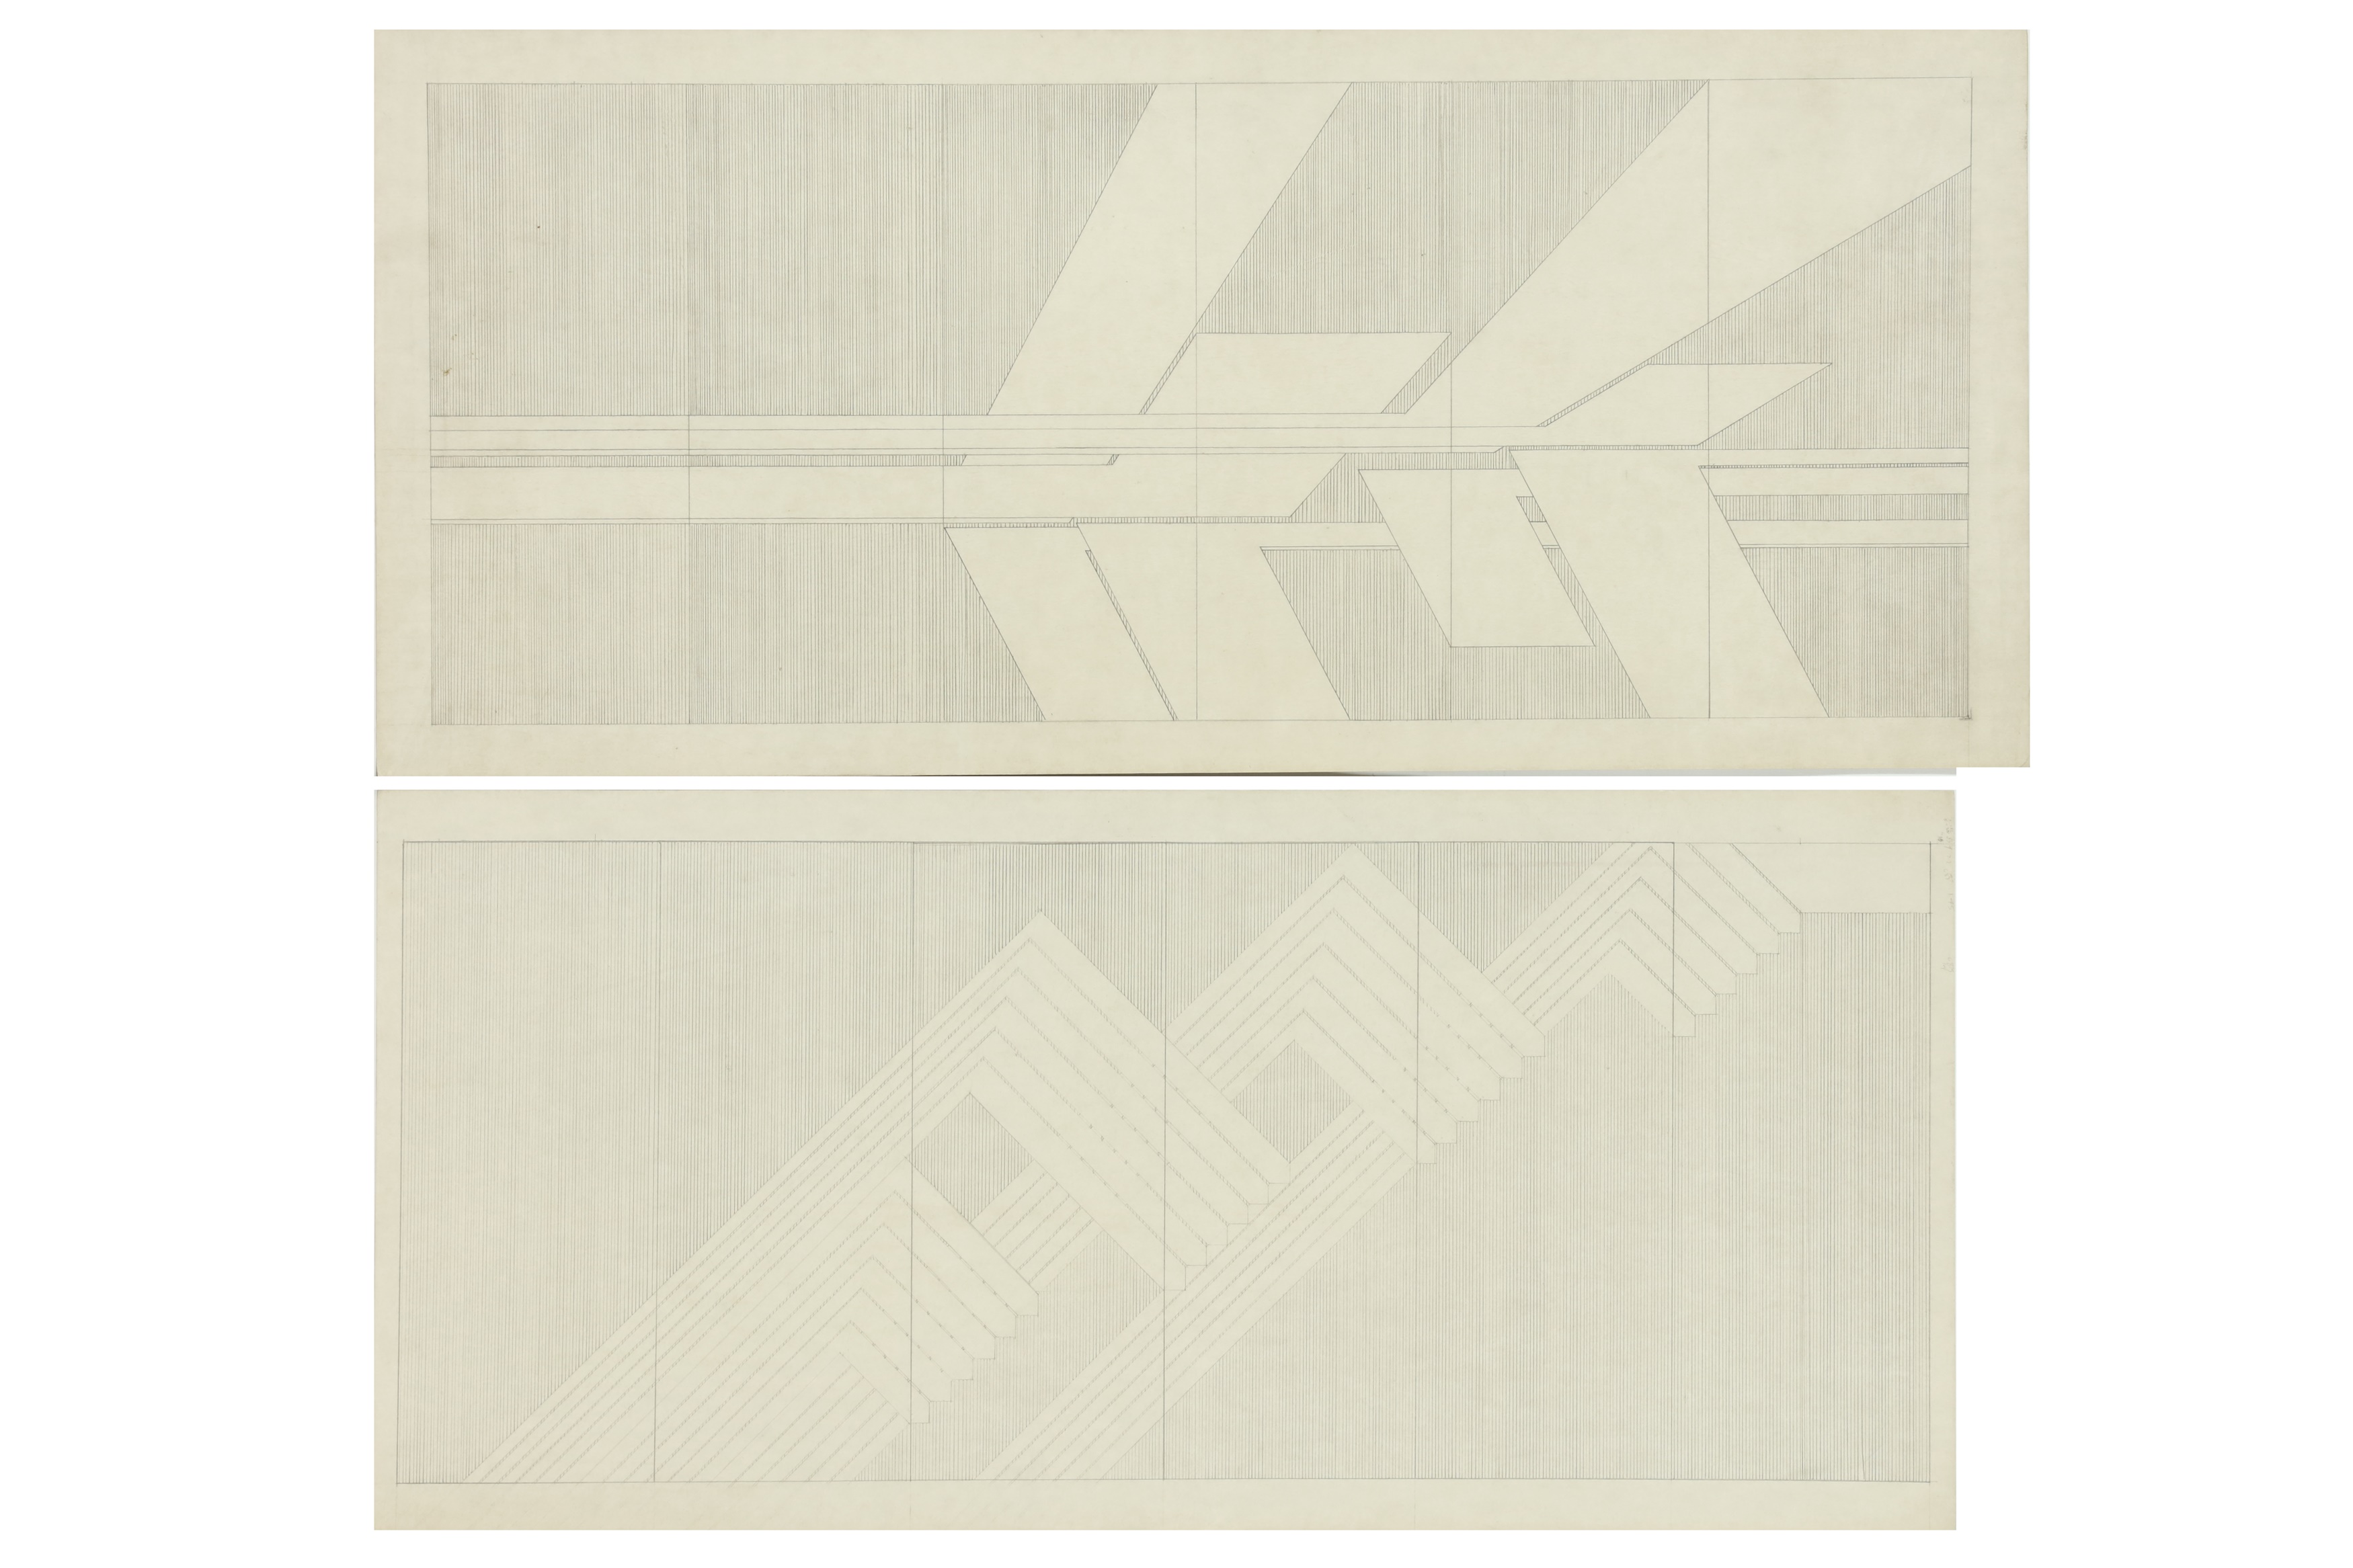 ABSTRACT GEOMETRIC DESIGNS MID 20TH CENTURY - Image 4 of 4